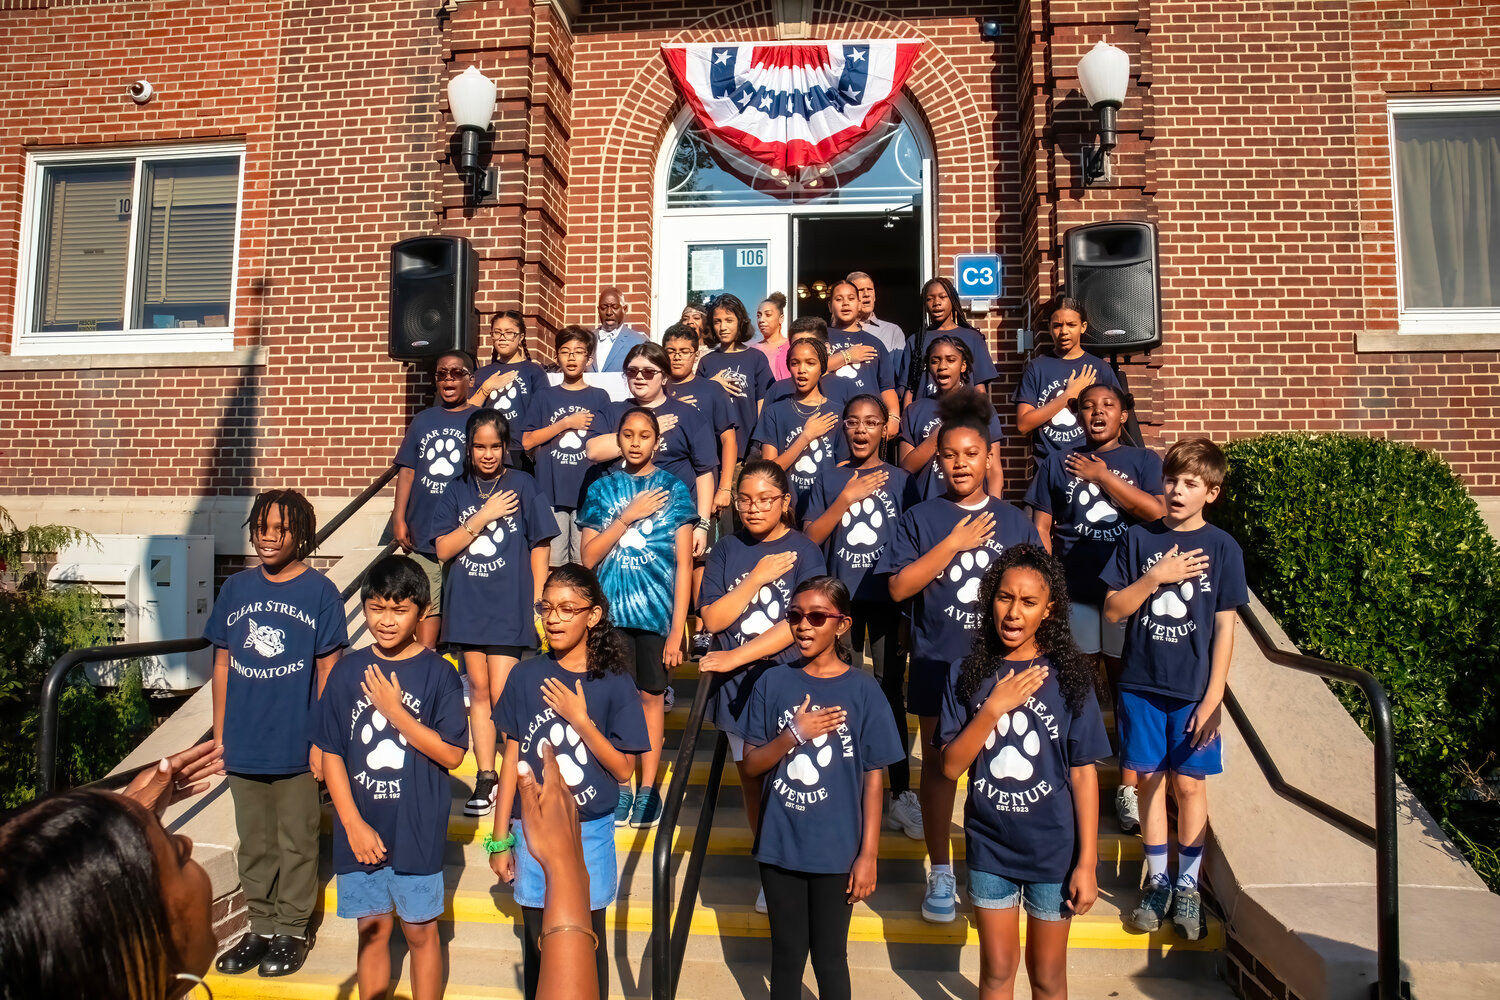 Clear Stream Avenue’s sixth-grade chorus sang the national anthem in kicking off the 100 Year Anniversary celebration.